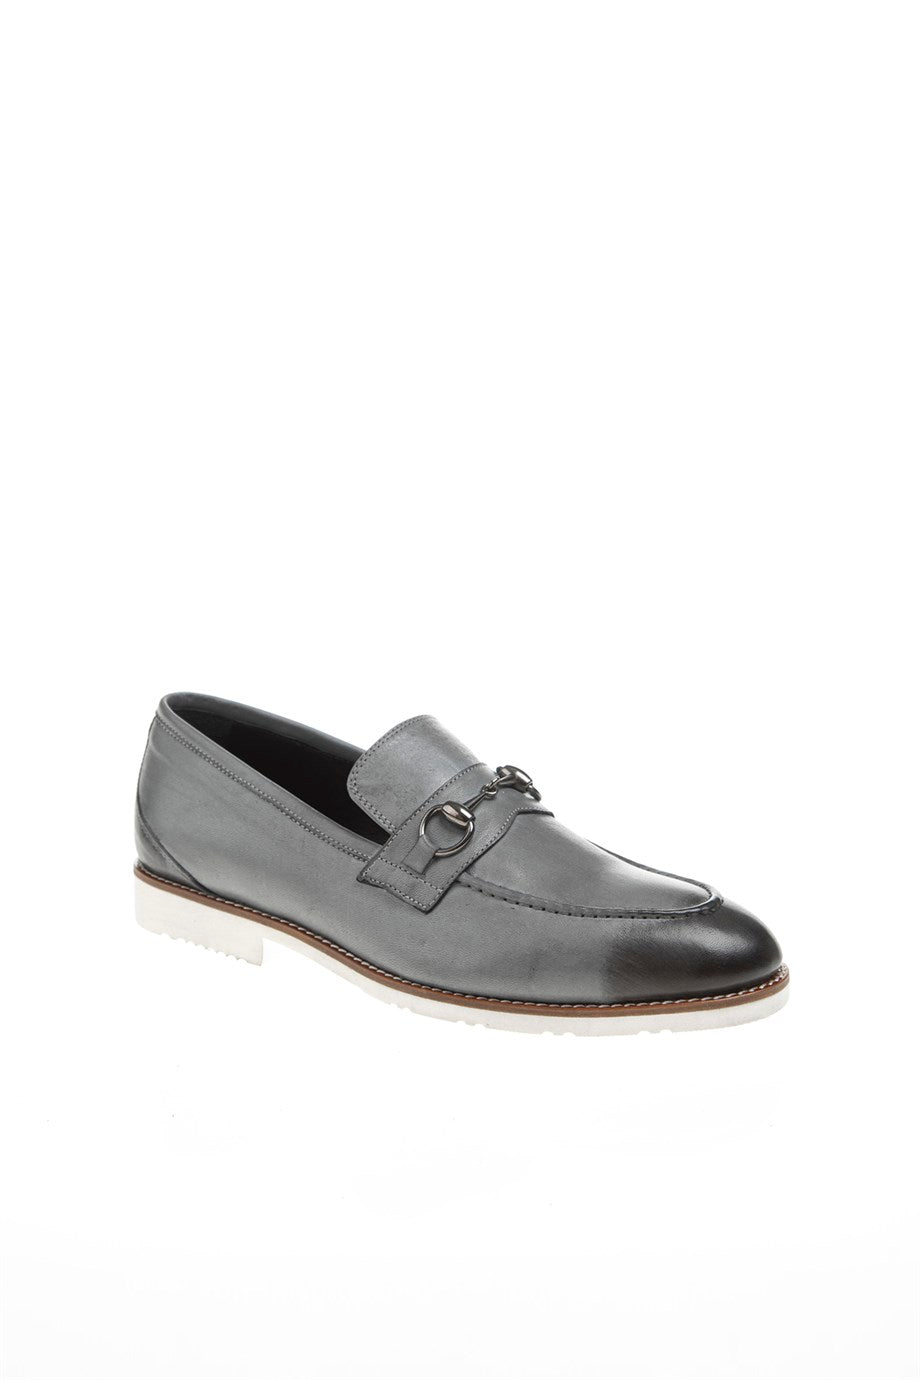 Eva Sole Genuine Leather Casual Shoes - MENSTYLEWITH